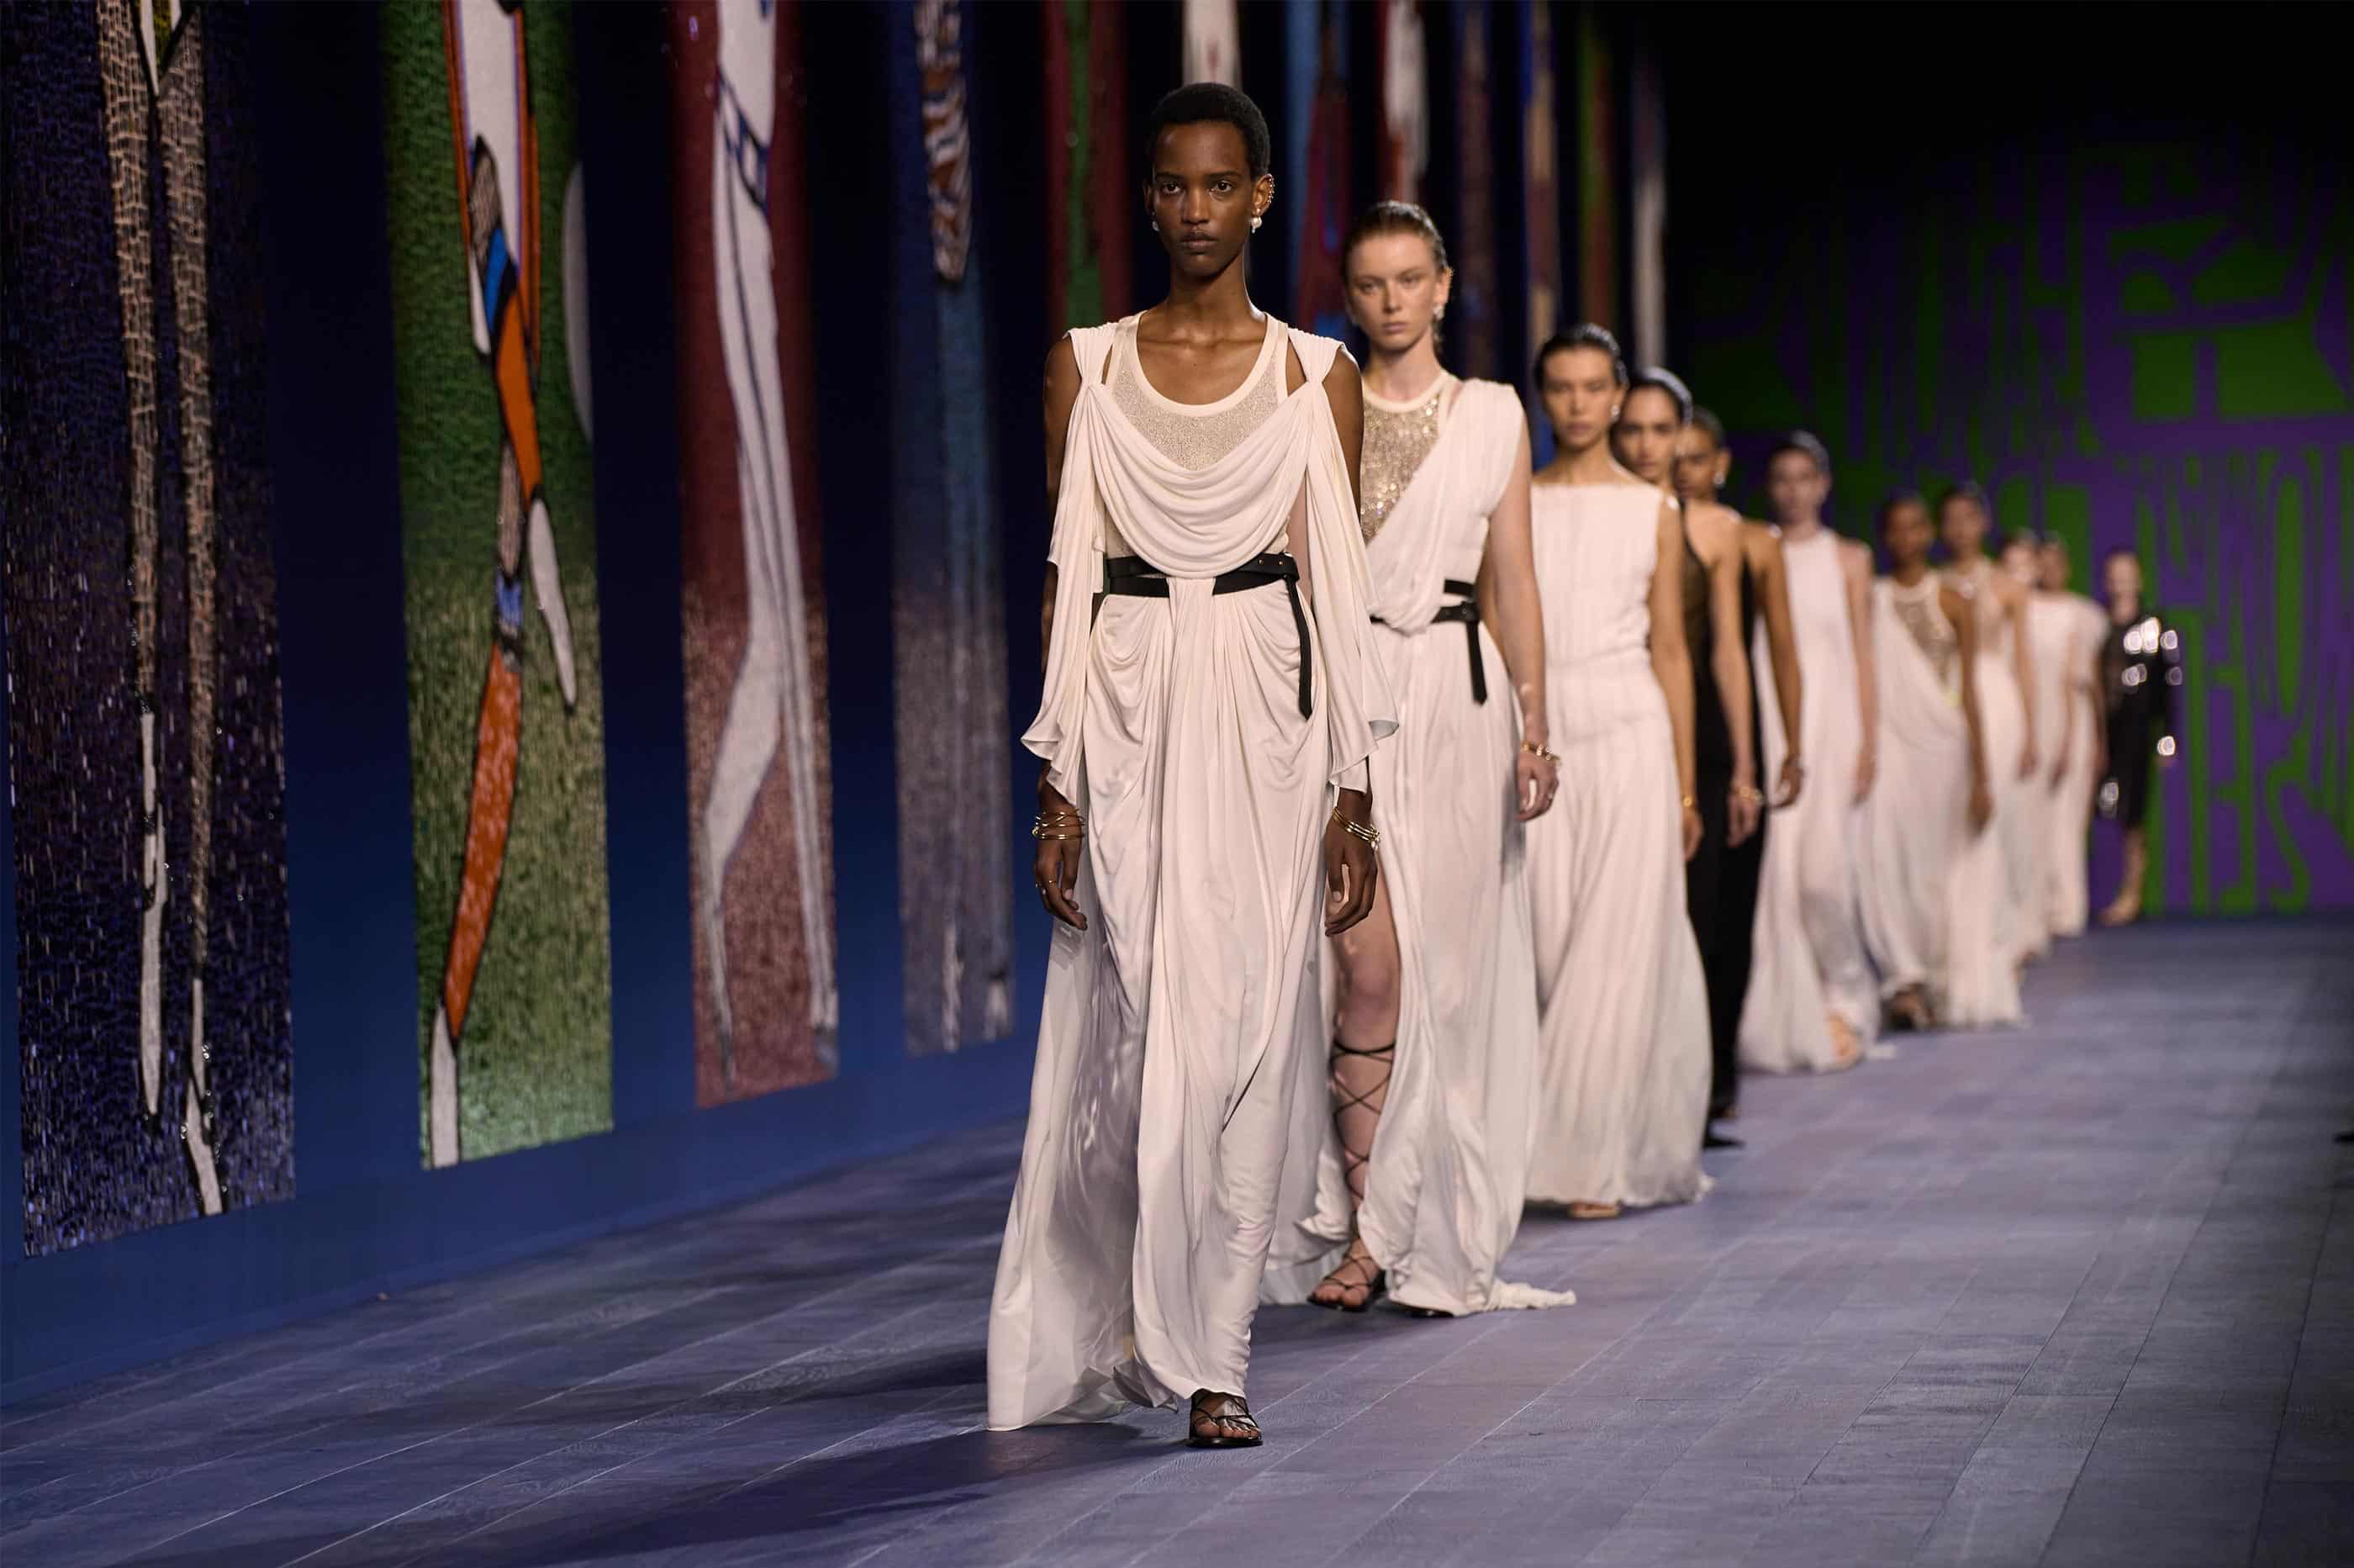 Dior's Haute Couture 2024/25 show on the eve of the Olympics pays homage to the birthplace of the Games